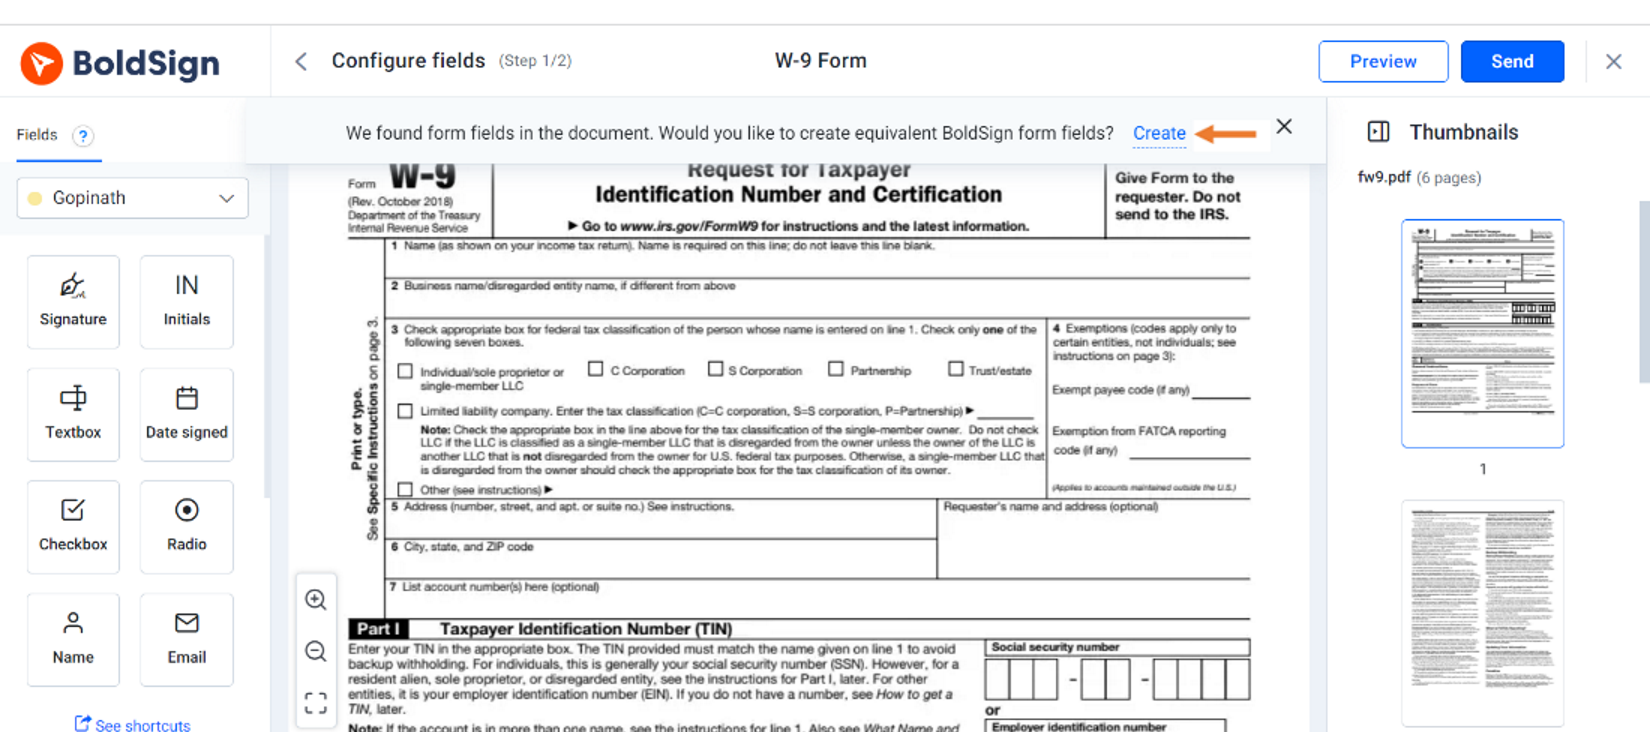 w-9-tax-form-uploaded-to-boldsign